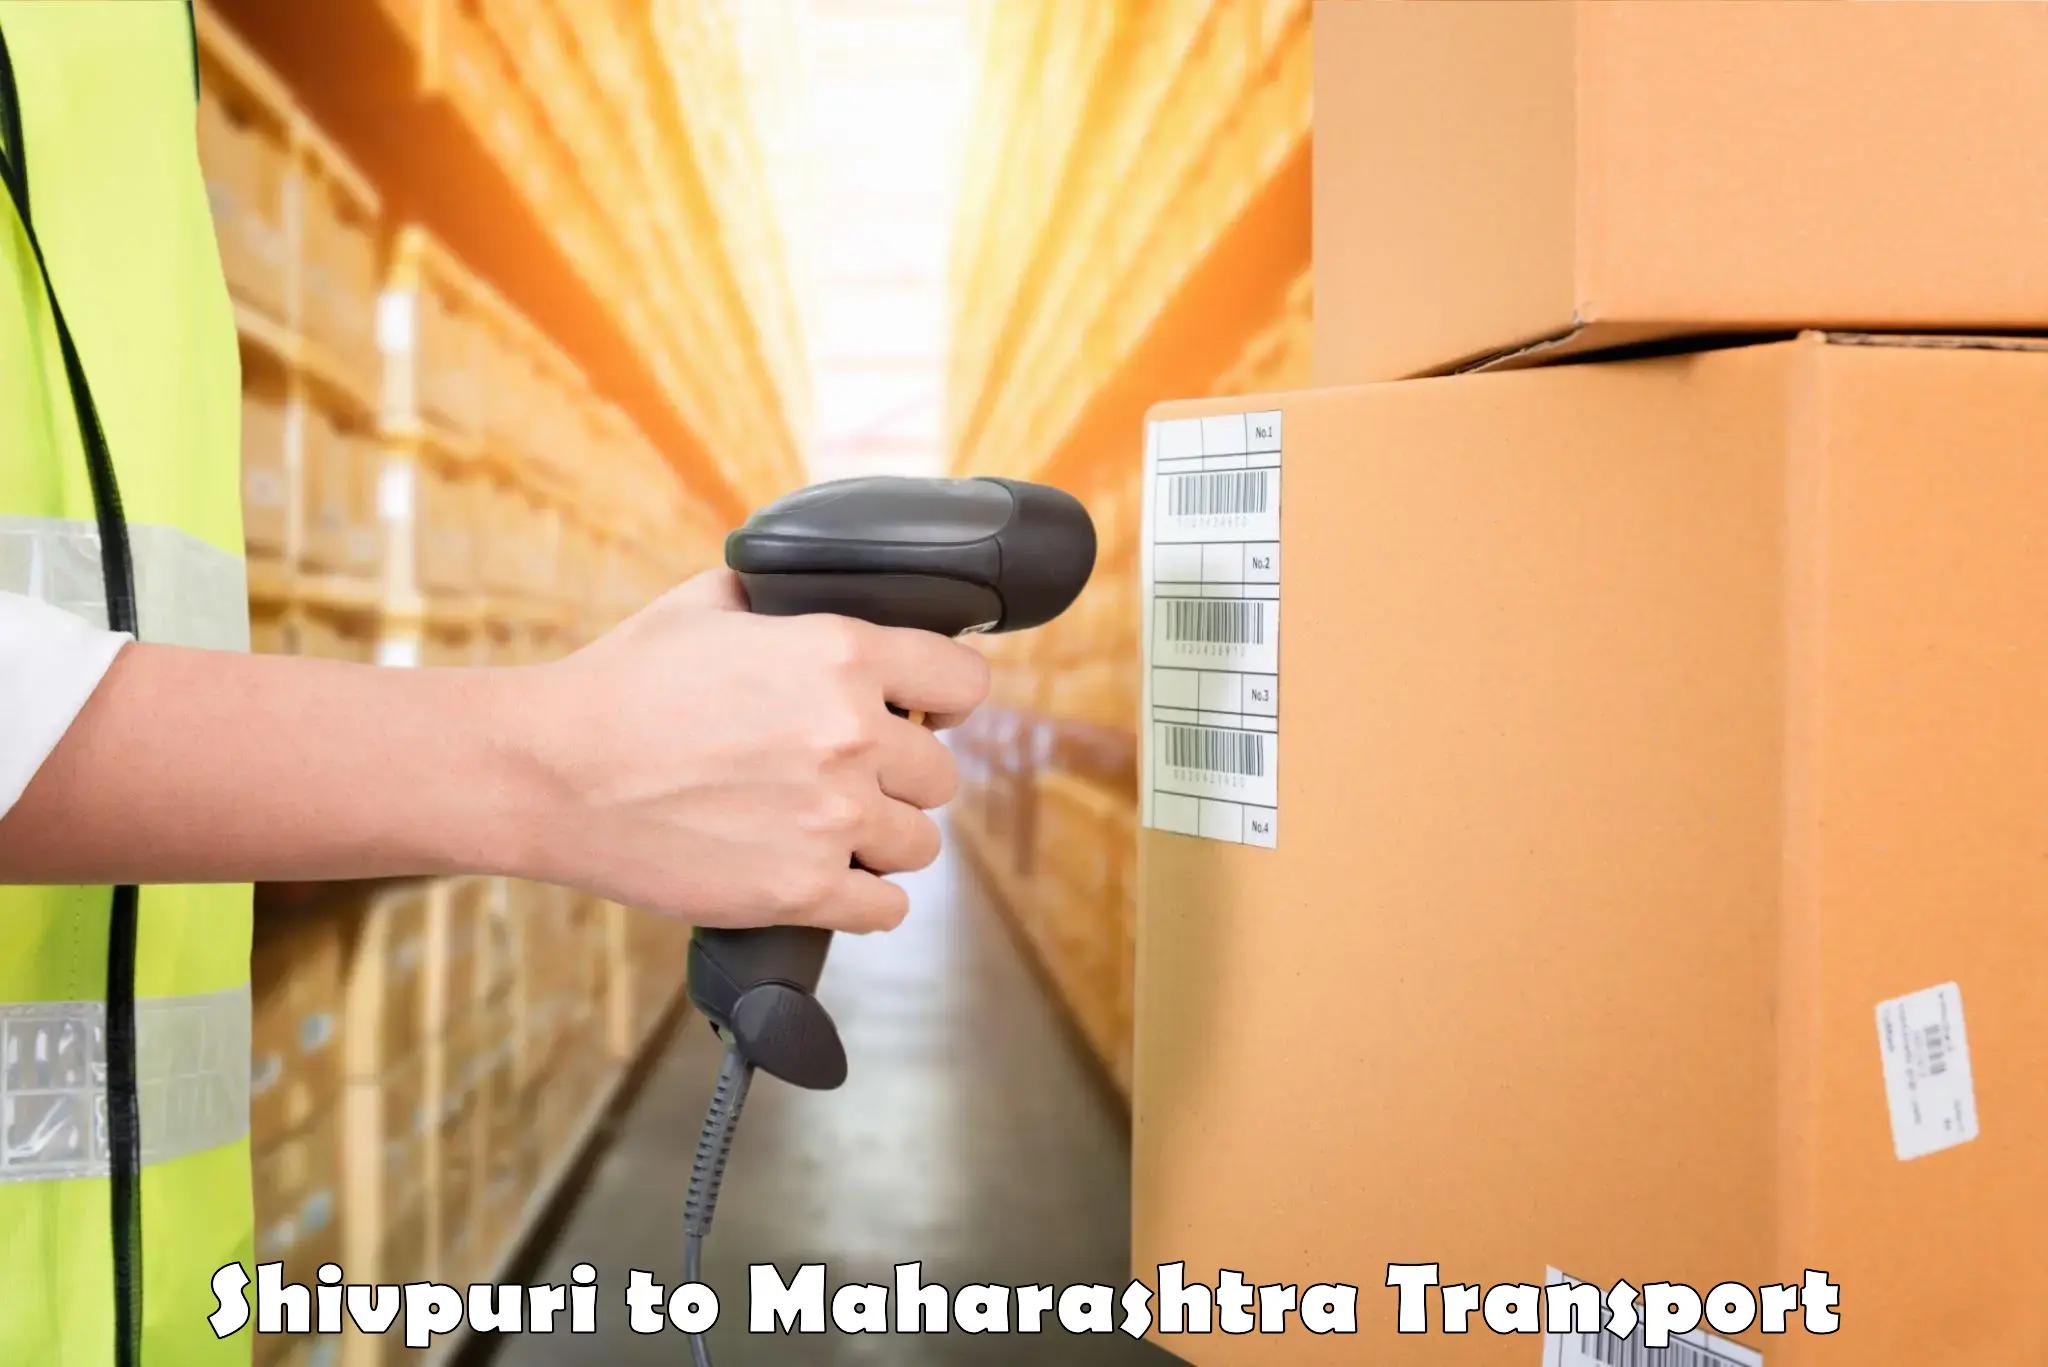 Truck transport companies in India Shivpuri to Jamkhed